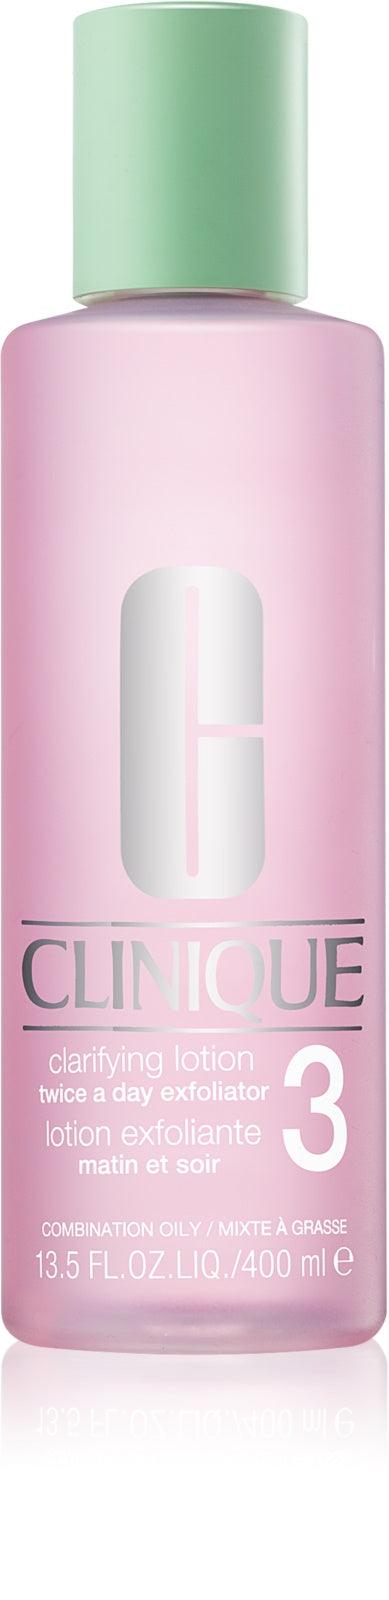 Clinique 3 Steps Clarifying Lotion 3 Toner for Oily and Combination Skin - Perfume Oasis